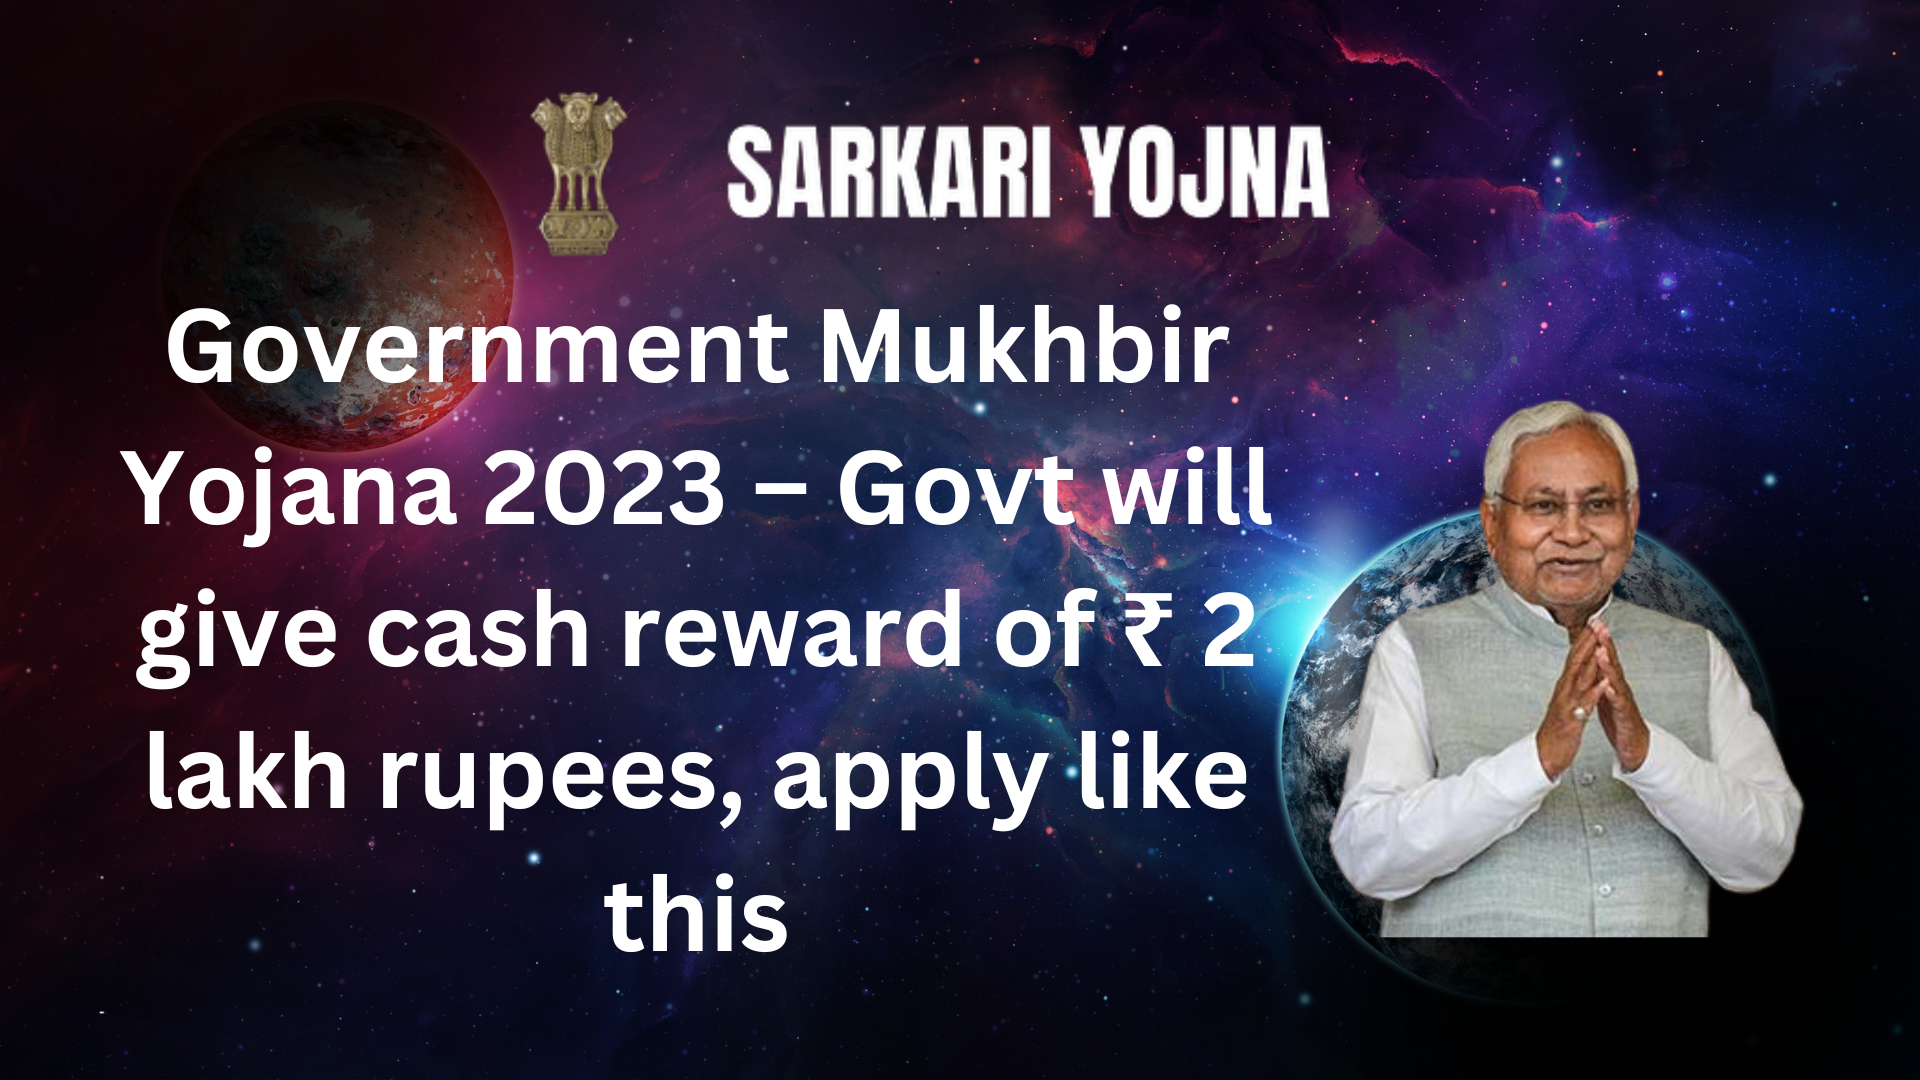 Government Mukhbir Yojana 2023 – The government will provide a cash incentive of 2 lakh if you apply in this manner